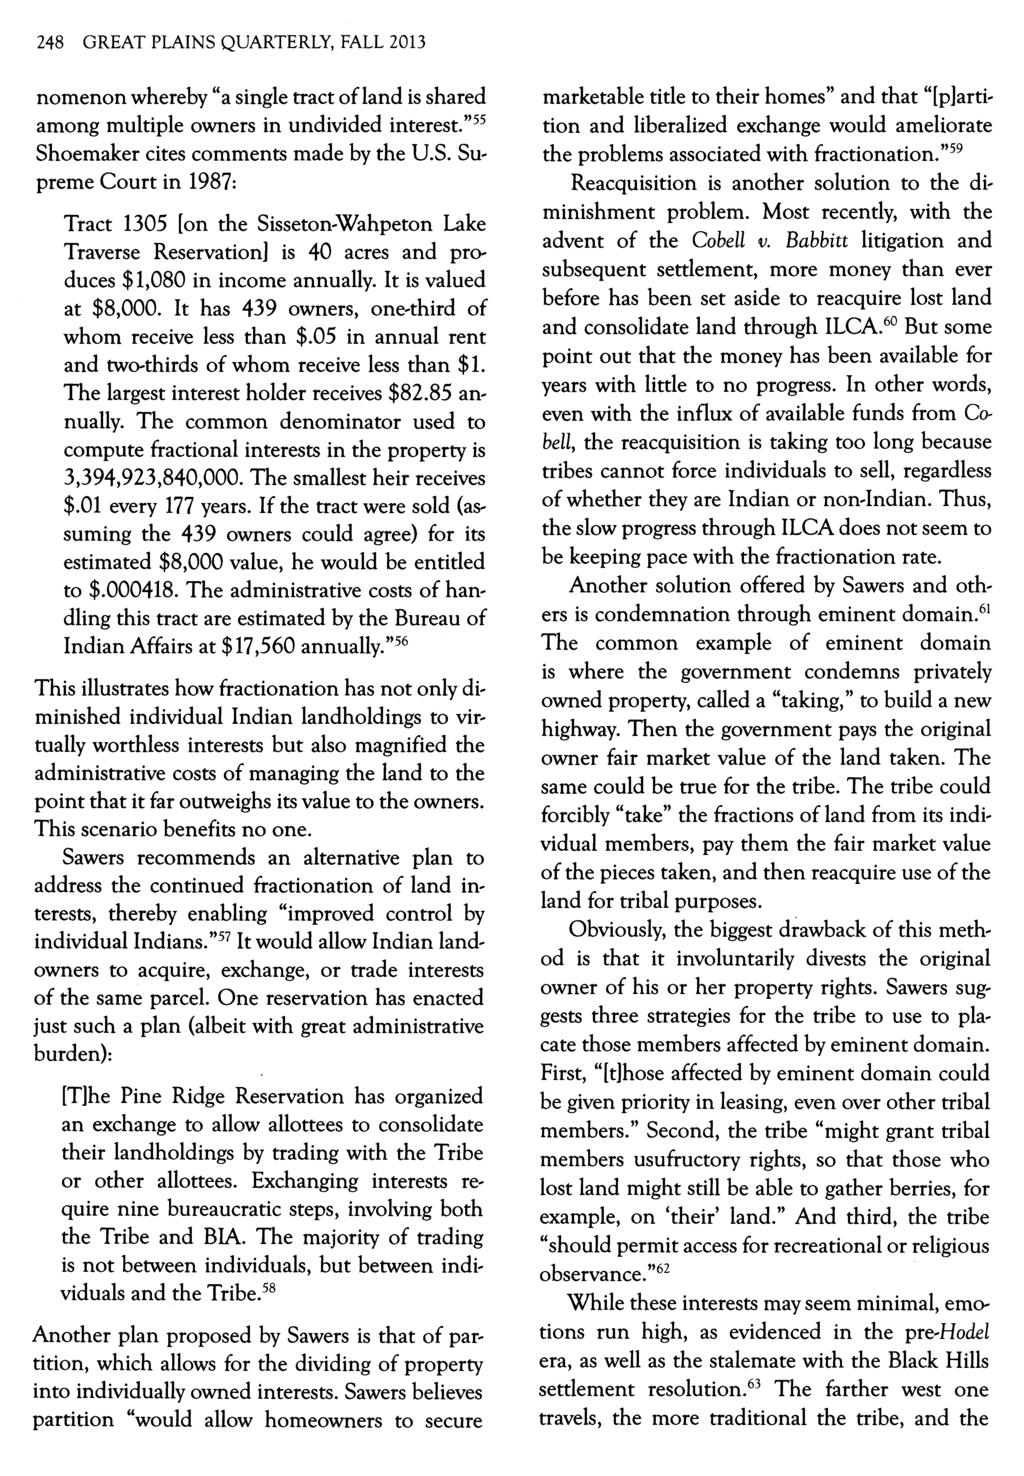 248 GREAT PLAINS QUARTERLY, FALL 2013 nomenon whereby "a single tract ofland is shared among multiple owners in undivided interest."55 Shoemaker cites comments made by the U.S. Supreme Court in 1987: Tract 1305 [on the Sisseton-Wahpeton Lake Traverse Reservation] is 40 acres and produces $1,080 in income annually.